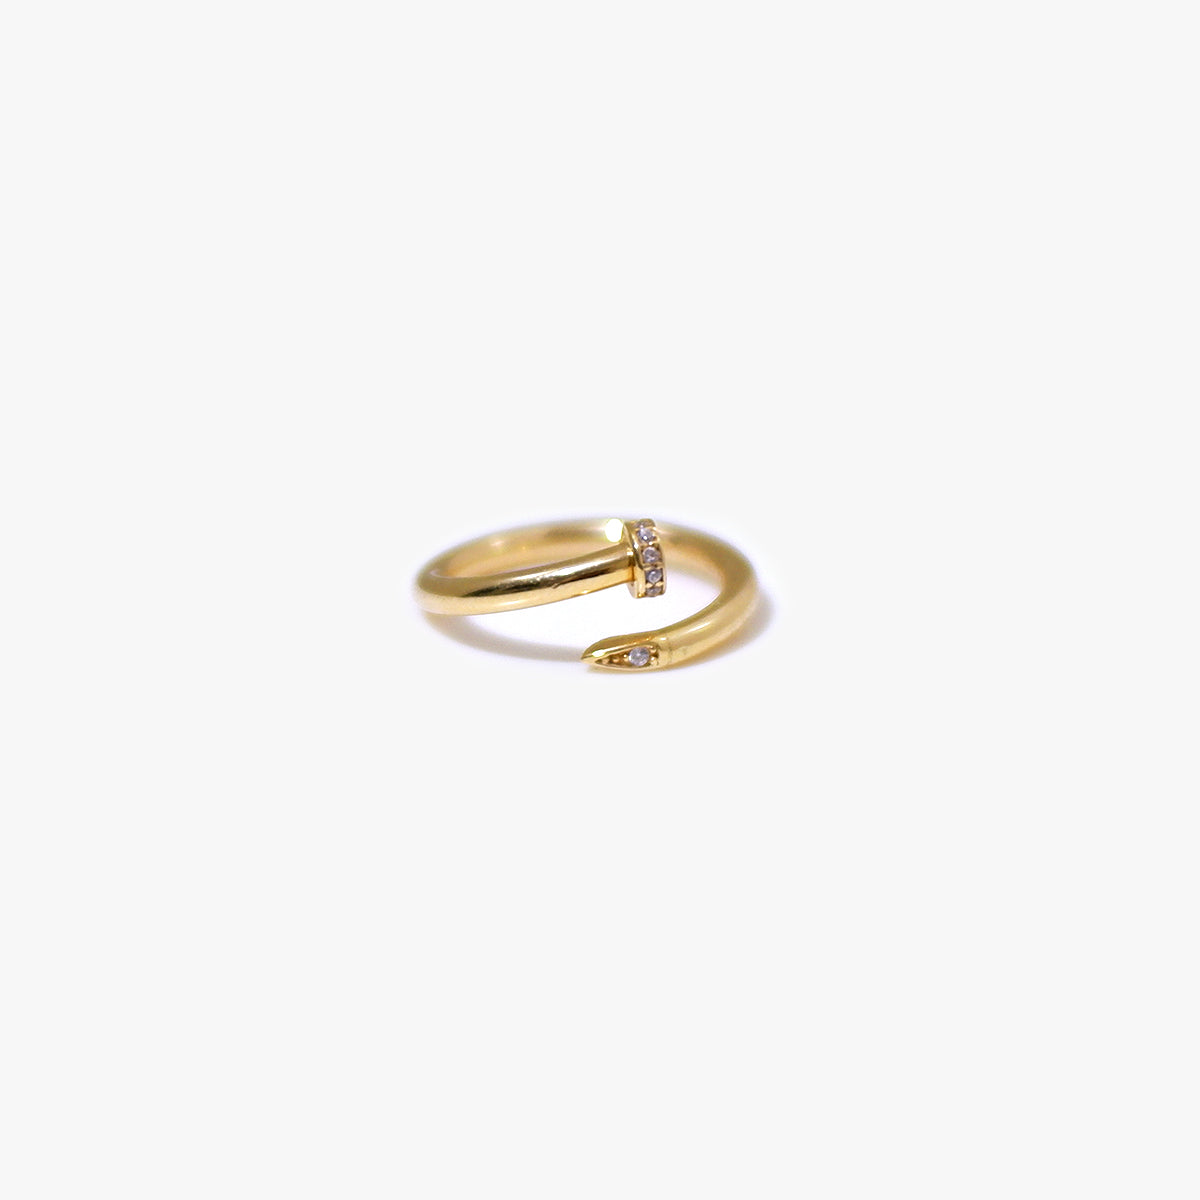 The Chunky Nail Ring in Solid Gold